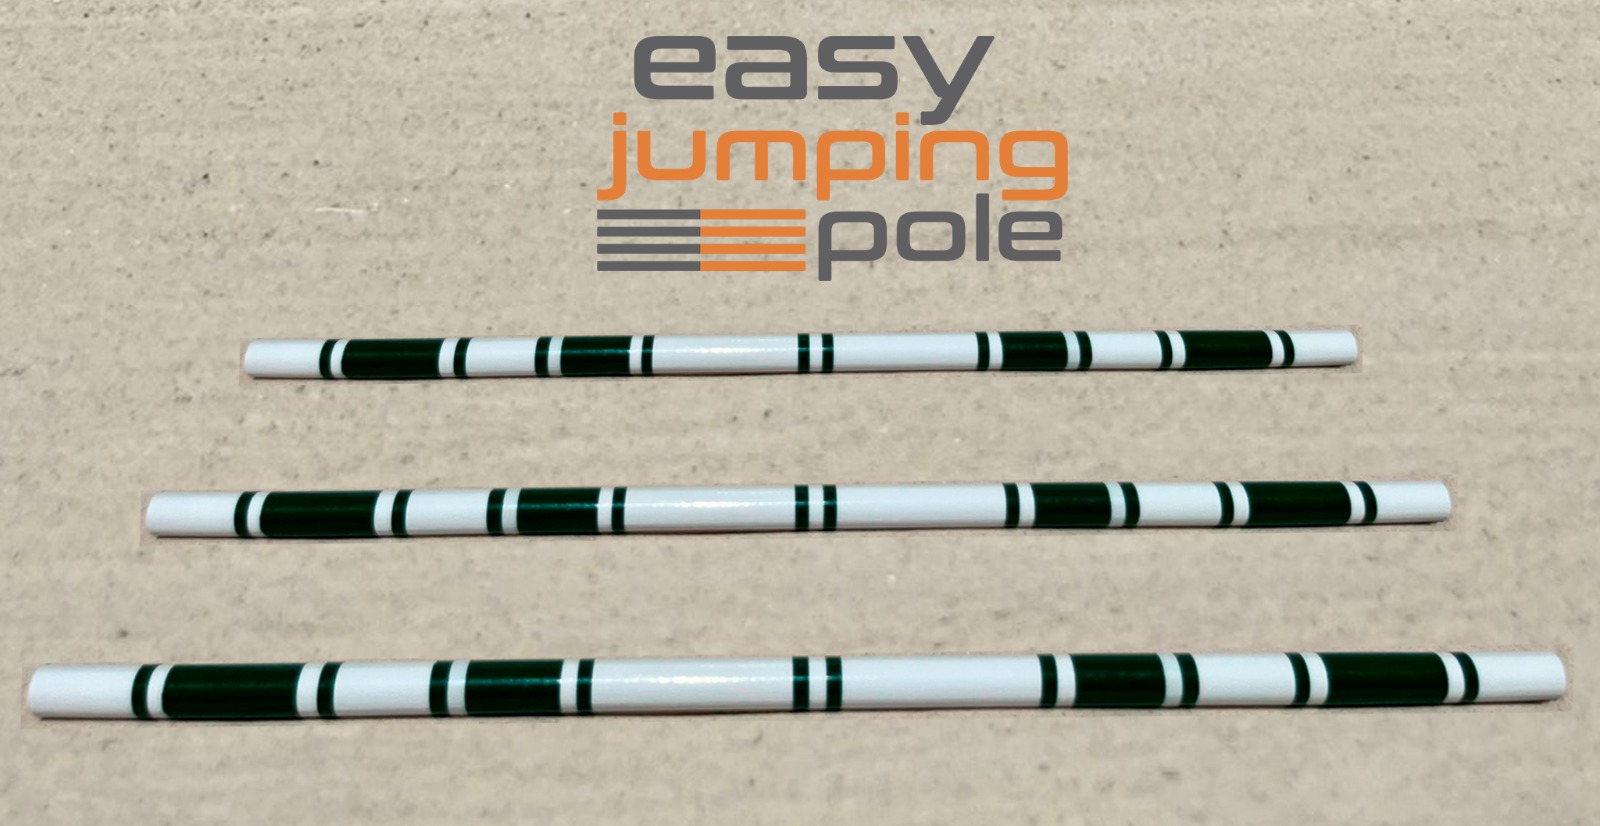 Easy jumping pole Model A-2